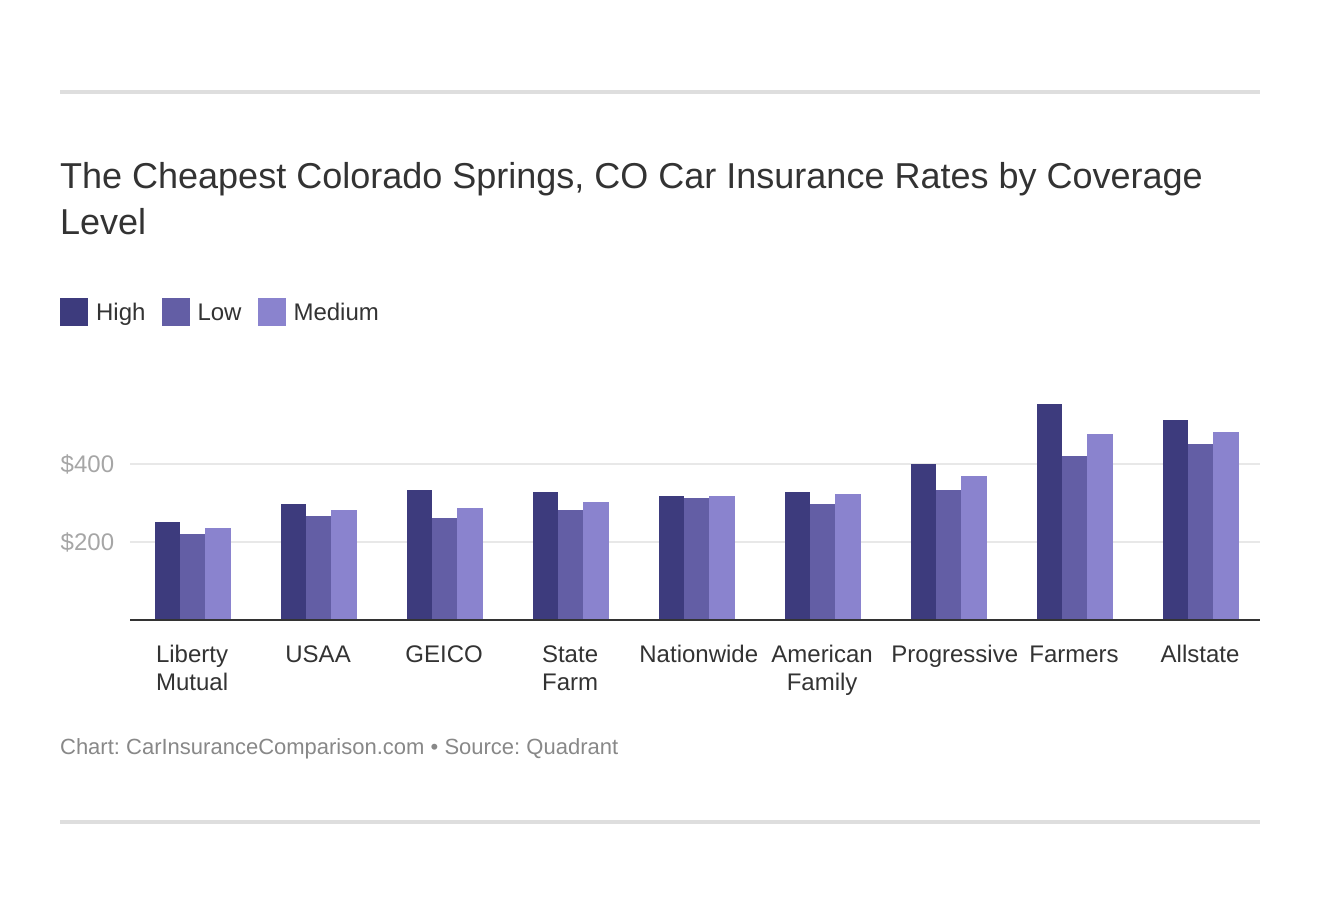 The Cheapest Colorado Springs, CO Car Insurance Rates by Coverage Level